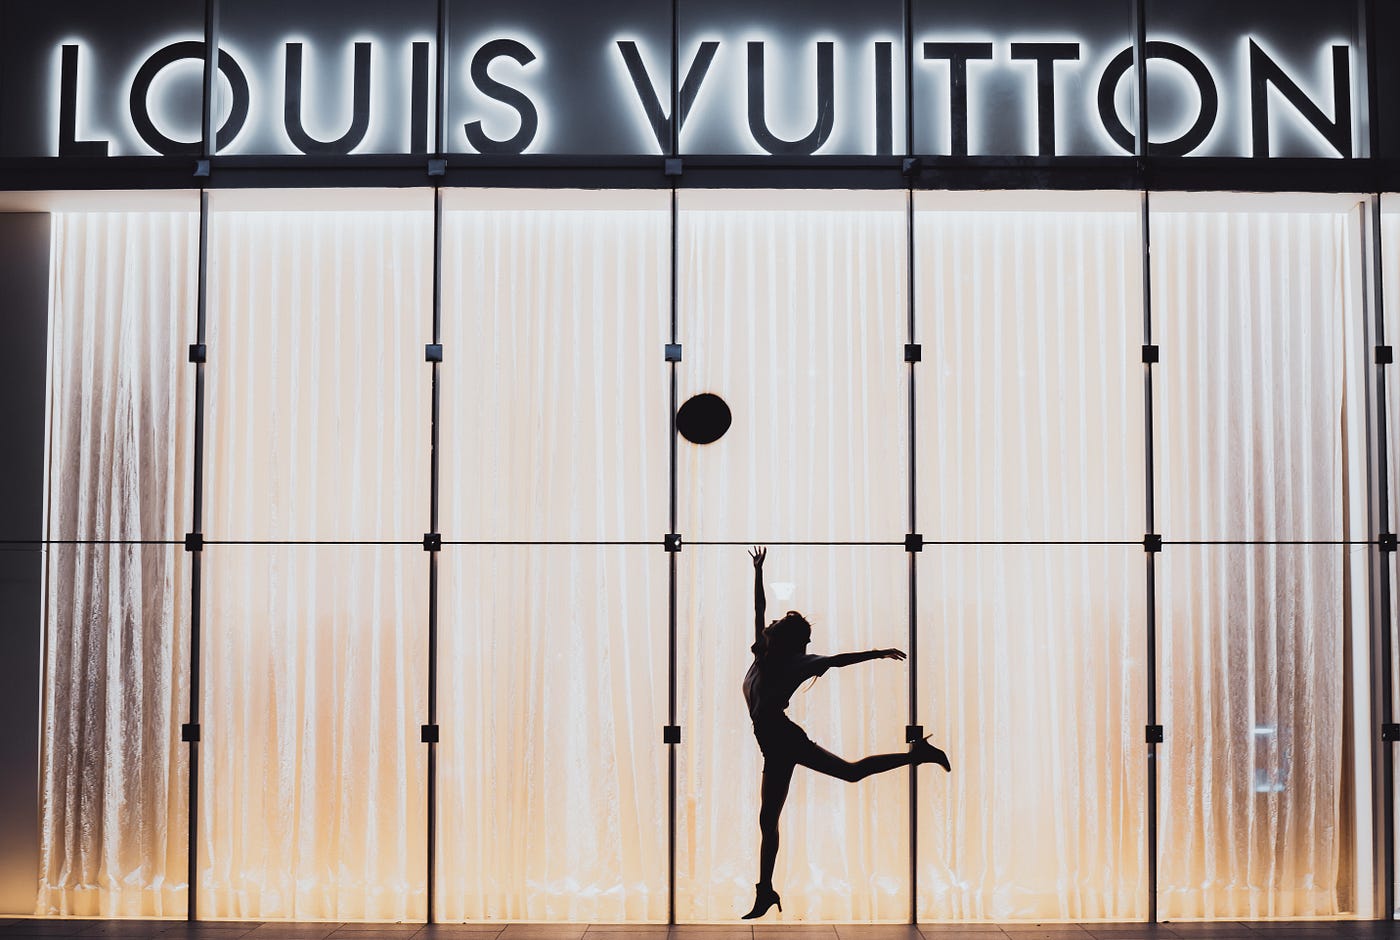 Louis Vuitton — The Story of Becoming the Most Expensive Fashion